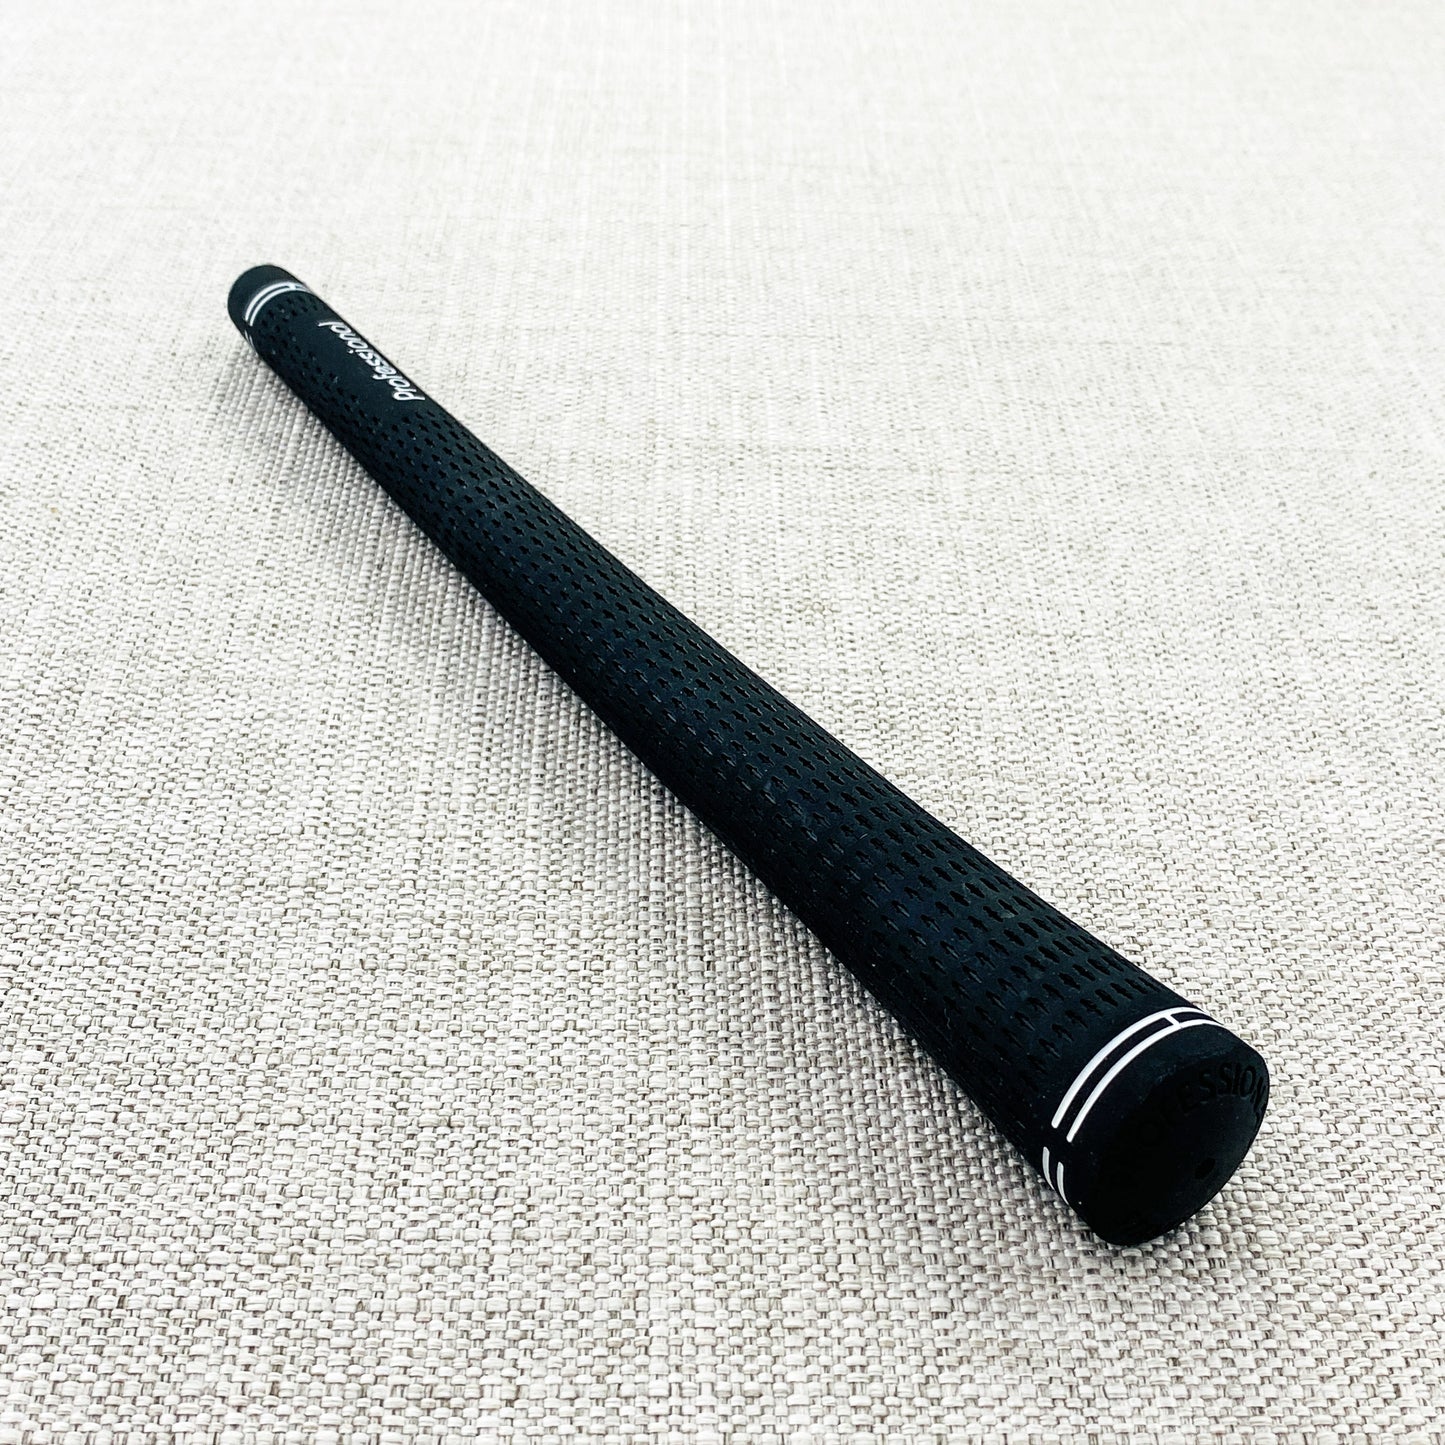 Professional brand budget swing grip. Choice of size. Black - Price includes fitment.